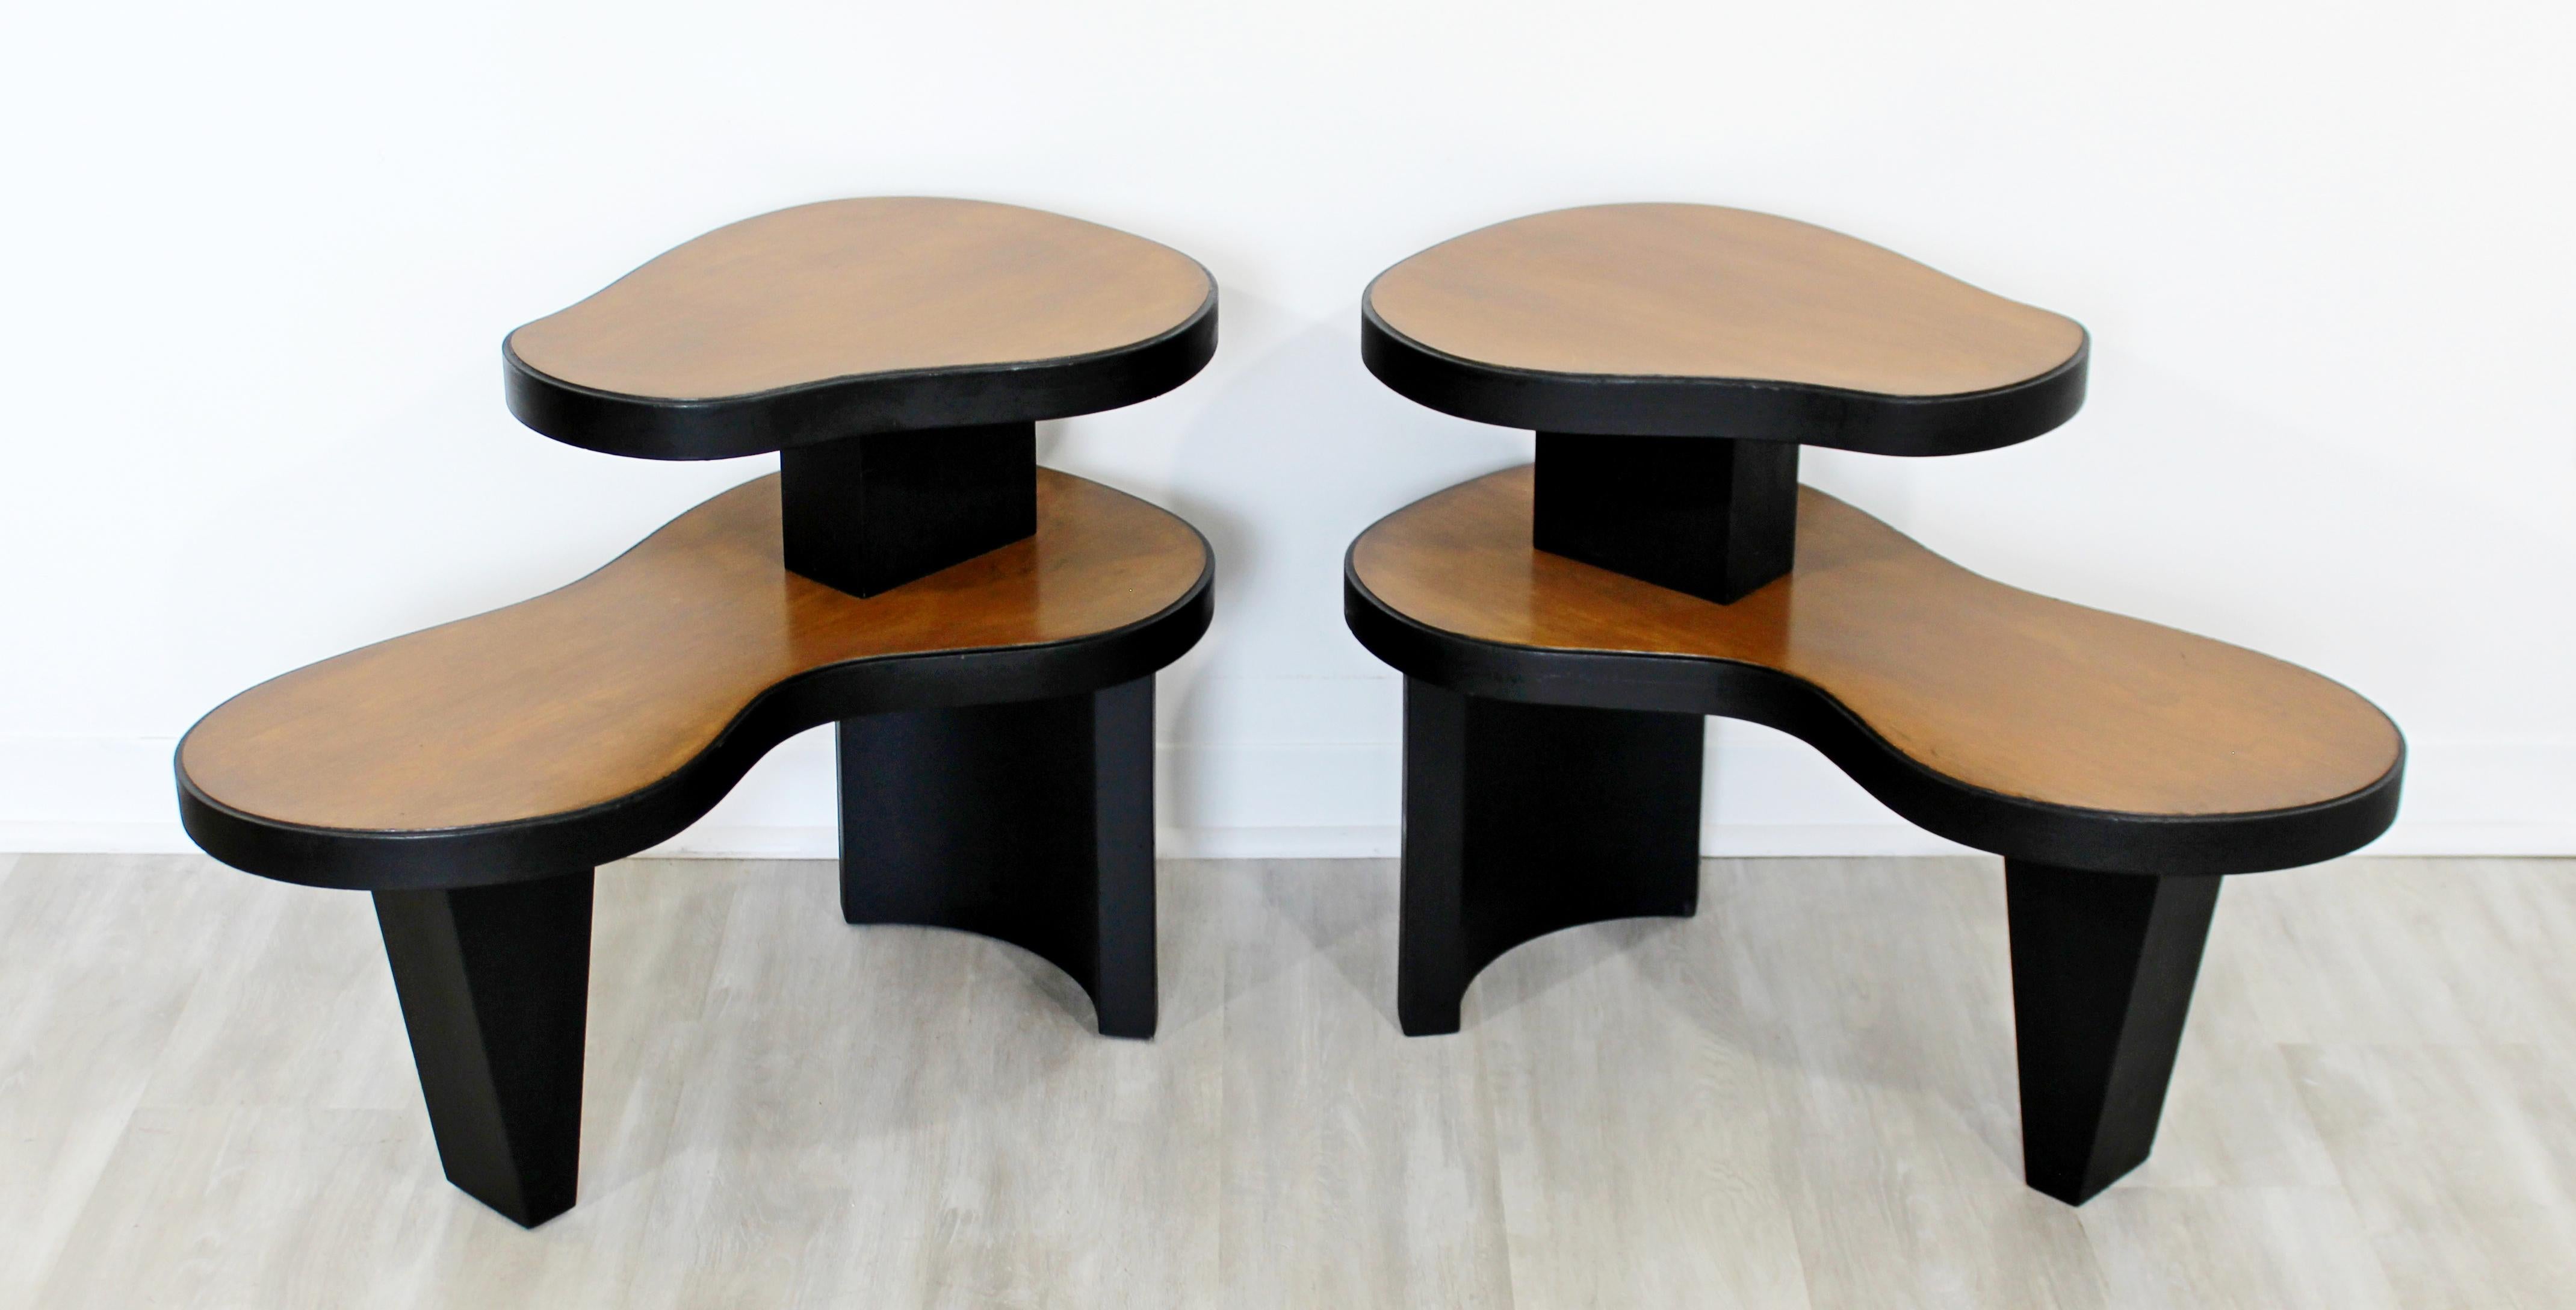 For your consideration is a magnificent pair of two tiered, Art Deco, amoeba shaped wood side or end tables, circa 1940s, in the style of Gilbert Rhode or Donald Deskey. In very good antique condition. The dimensions are 29